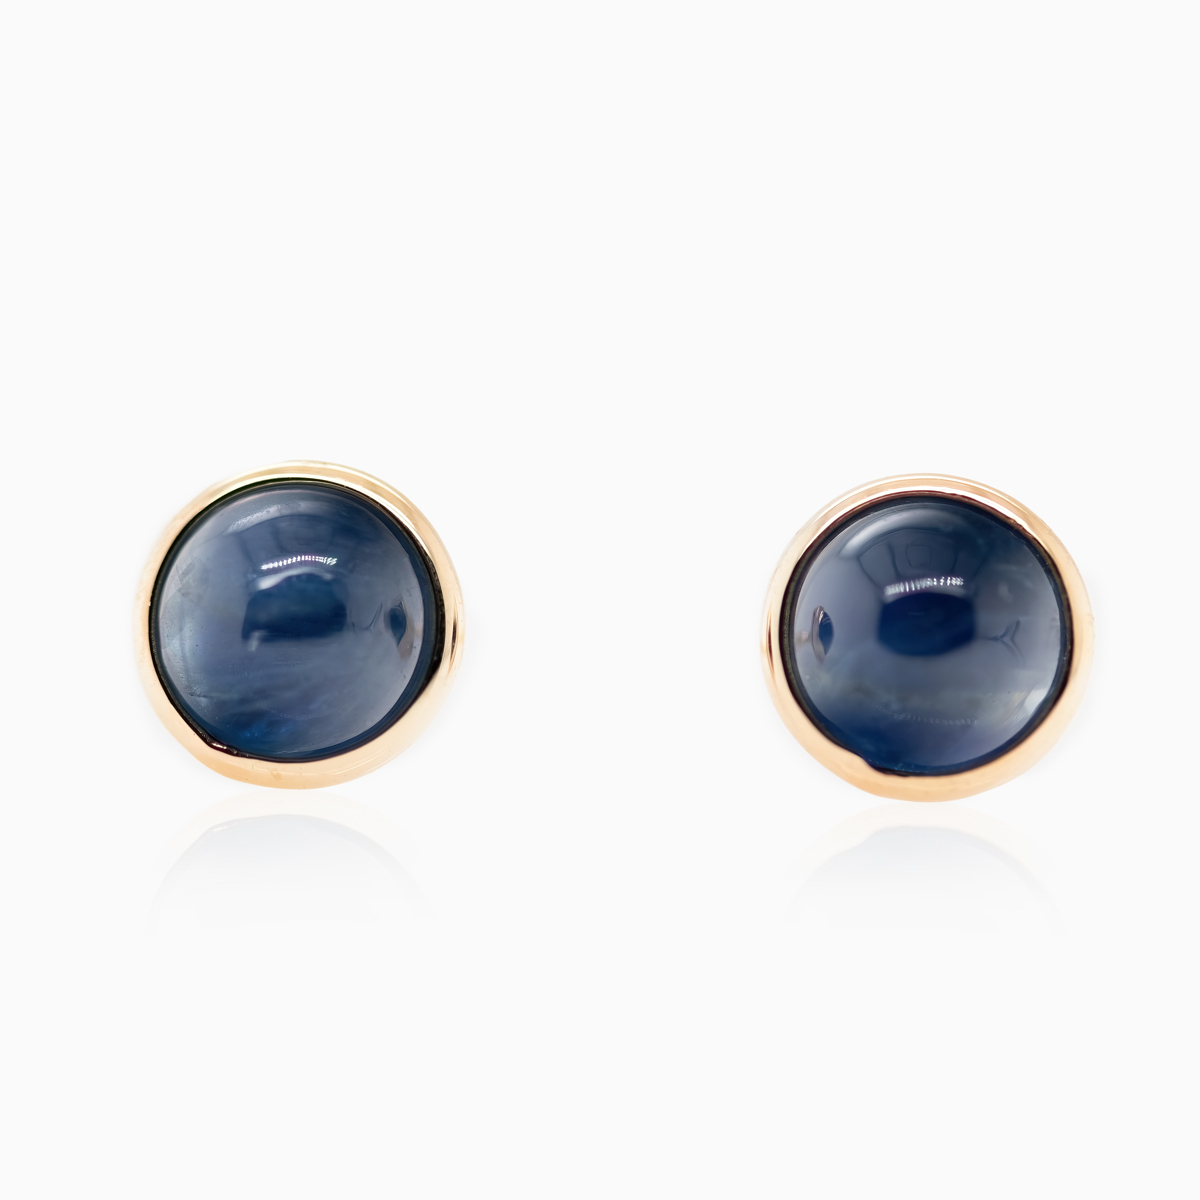 Cabochon Cut Natural Blue Sapphire Stud Earrings, 5mm, 14k Yellow Gold